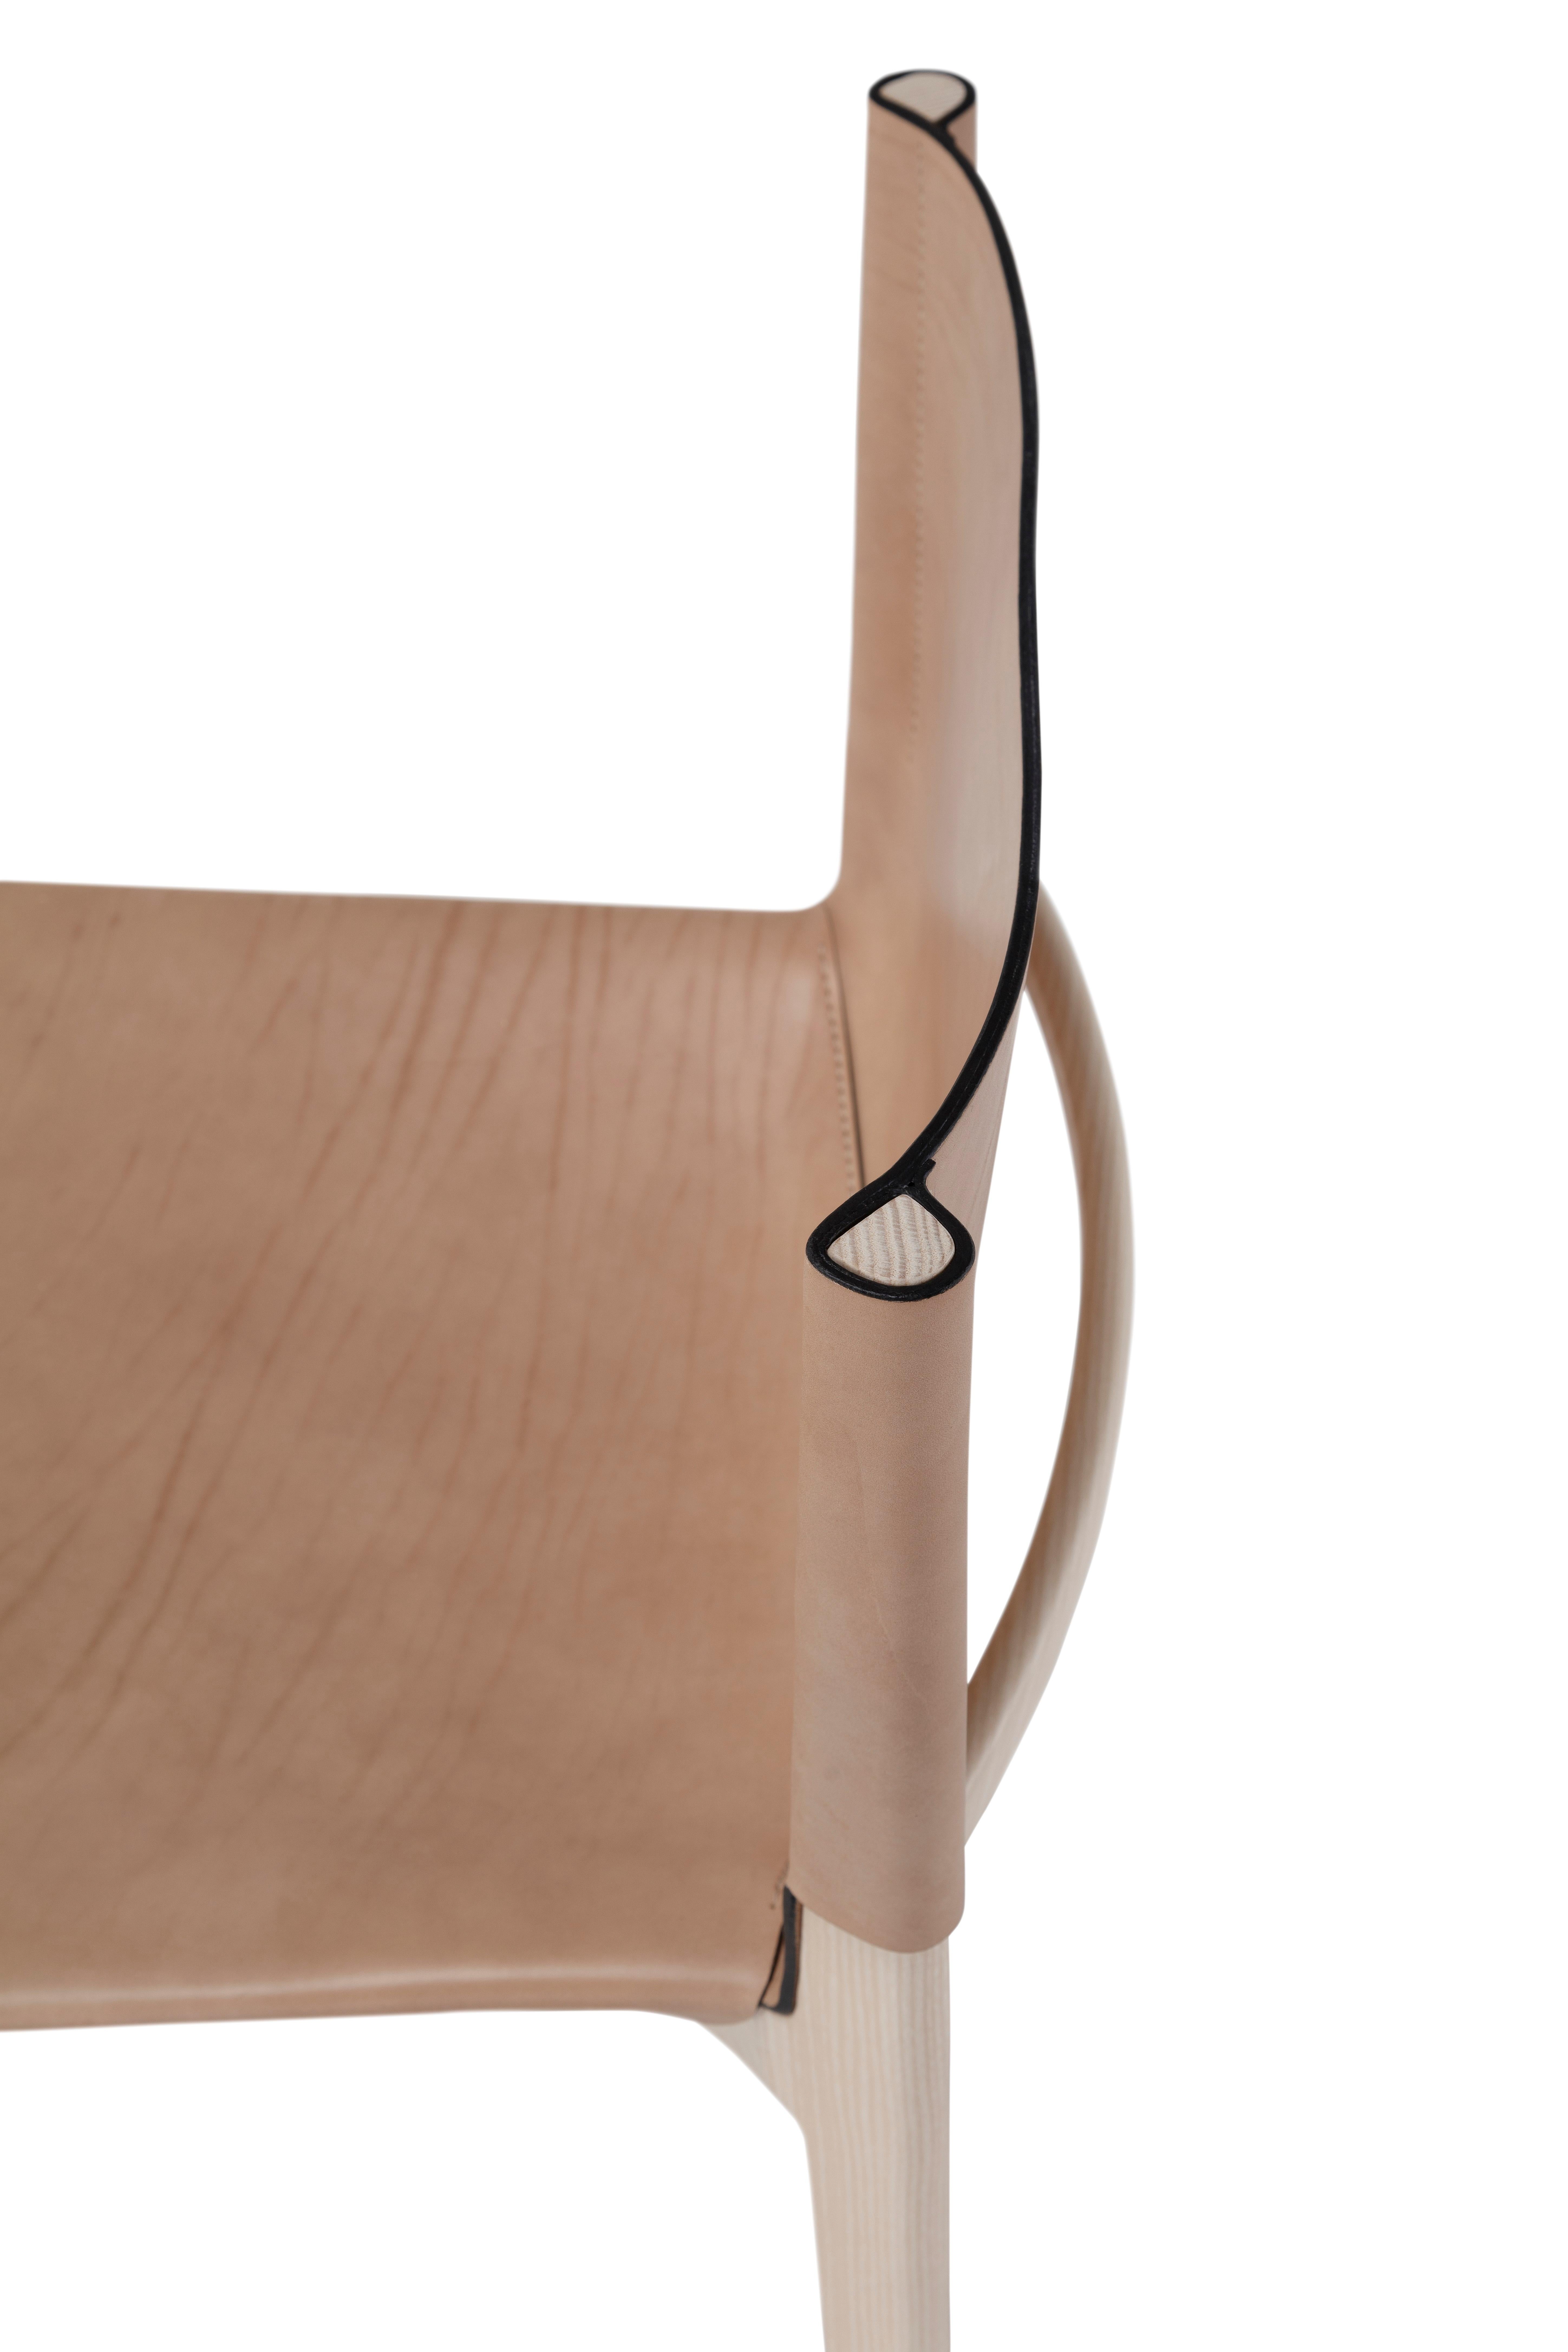 Contemporary Wooden Chair 'Stilt', Cuoio Leather For Sale 3